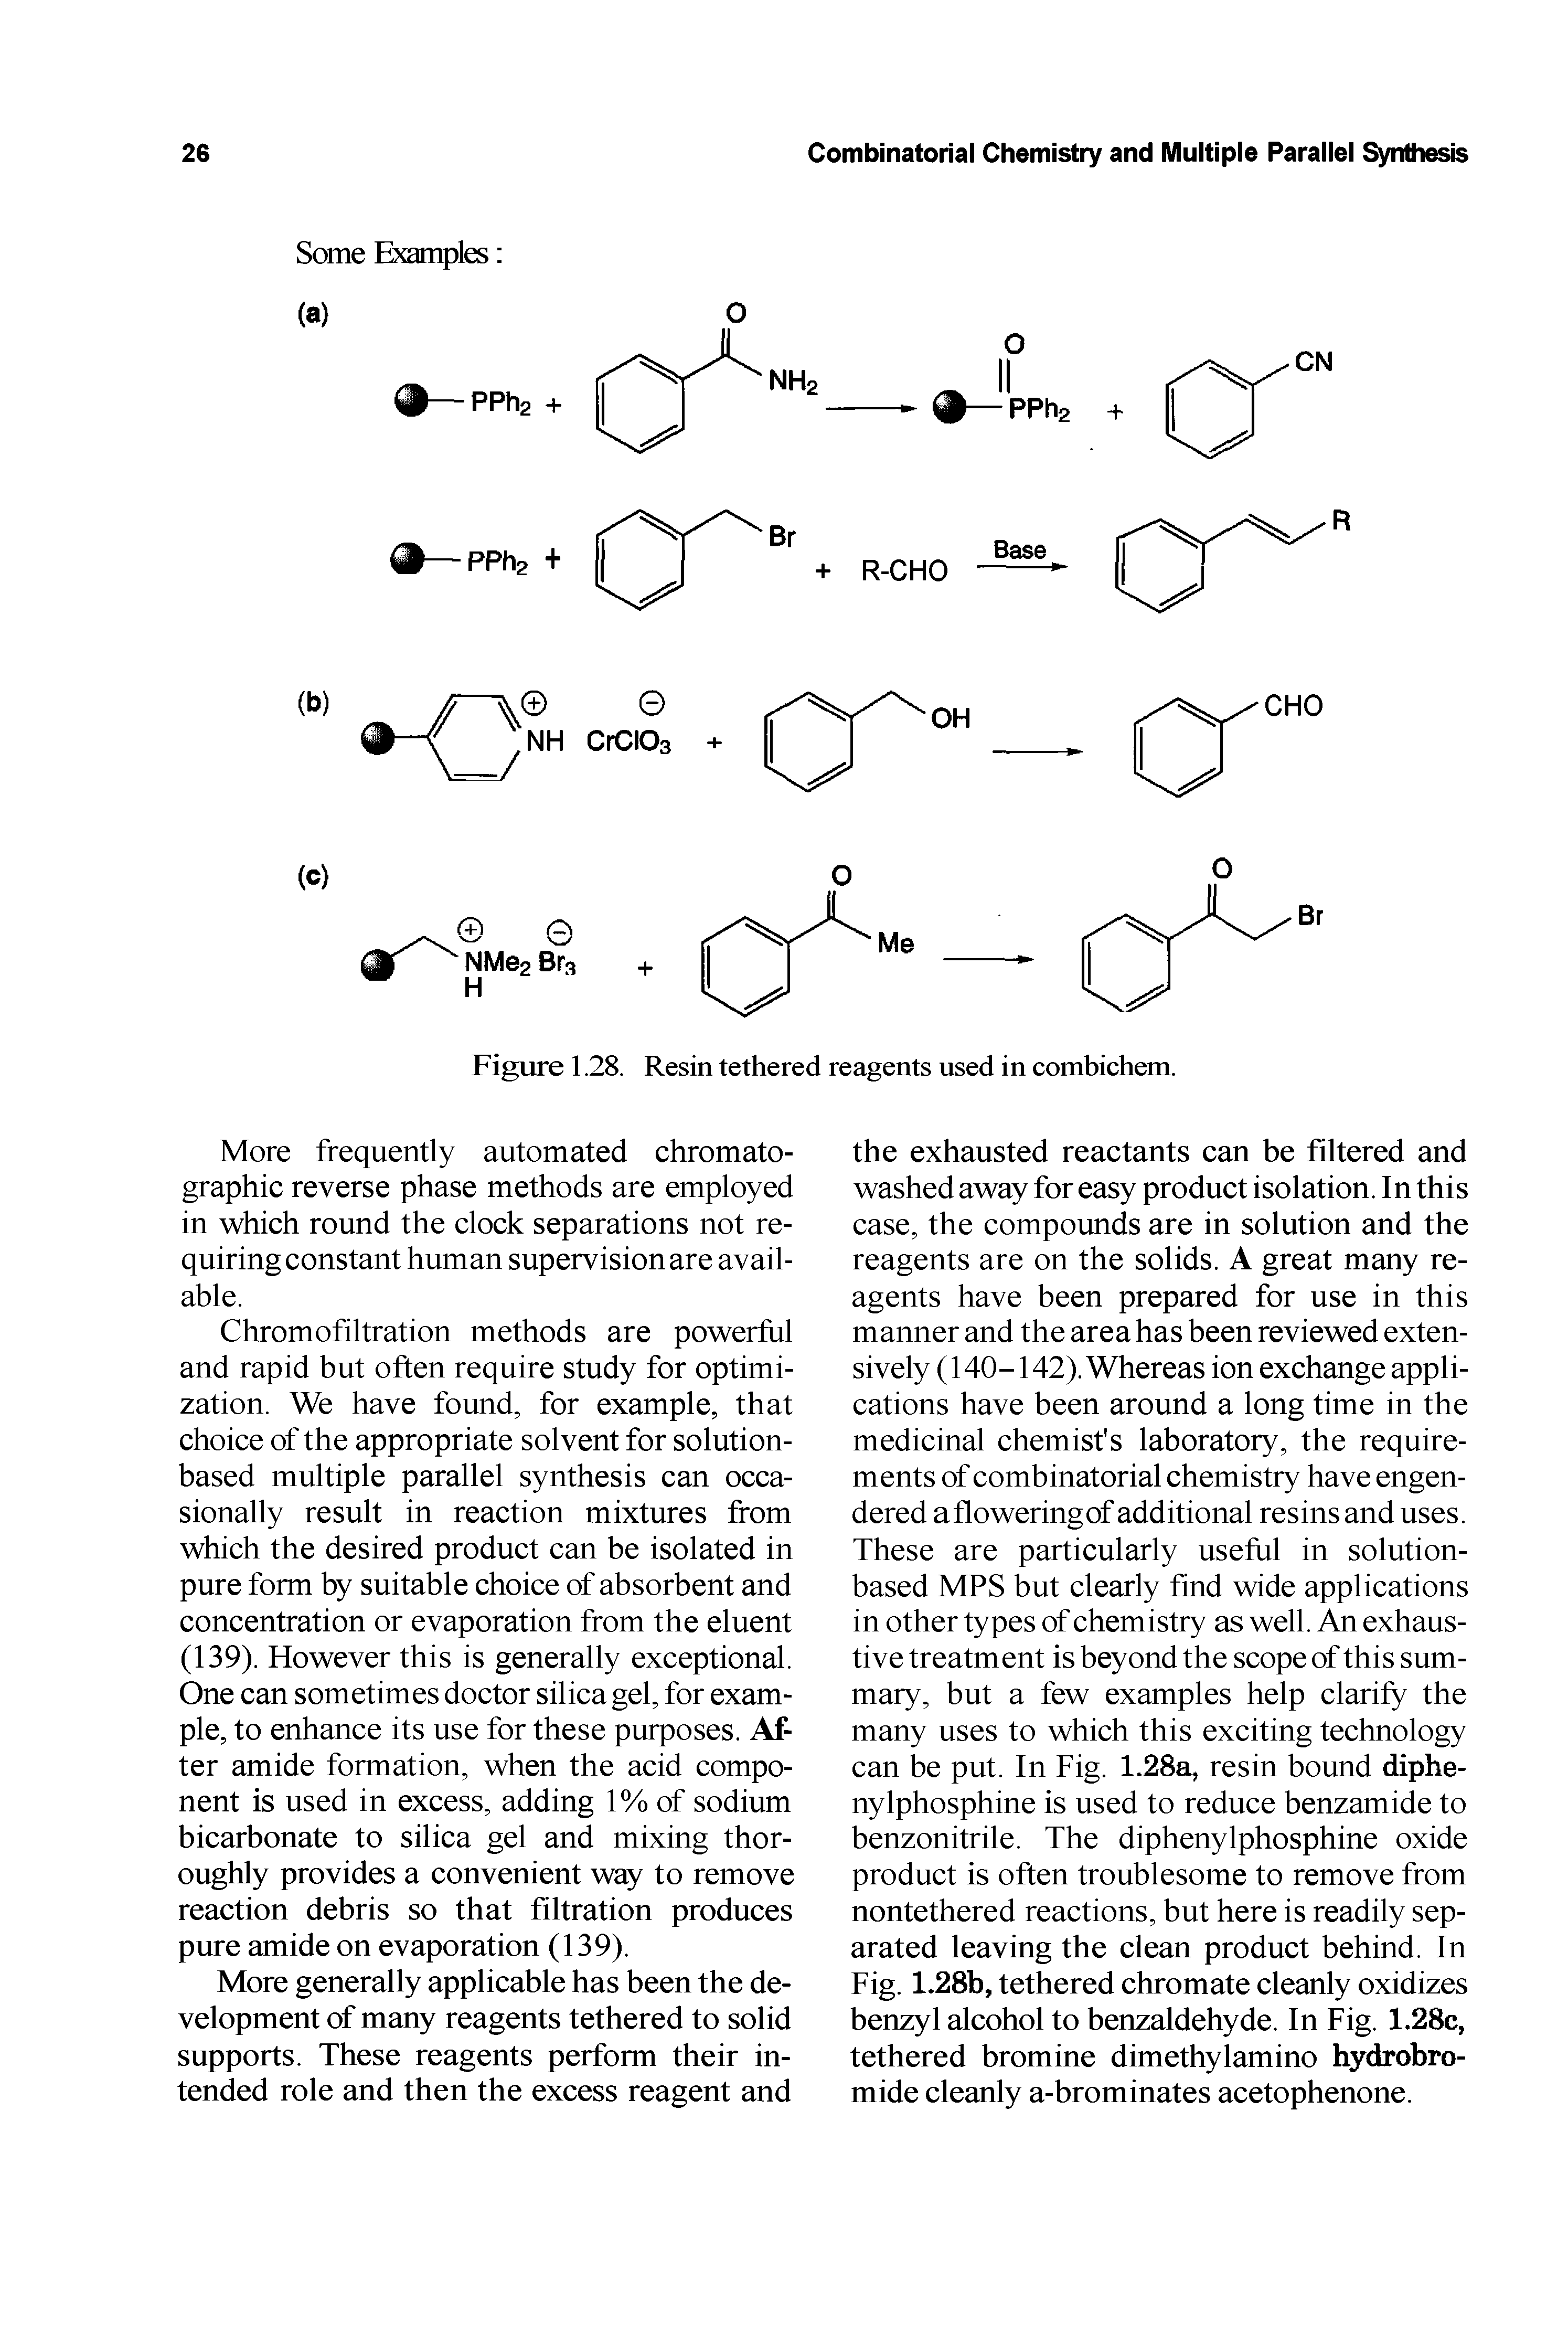 Figure 1.28. Resin tethered reagents used in combichem.